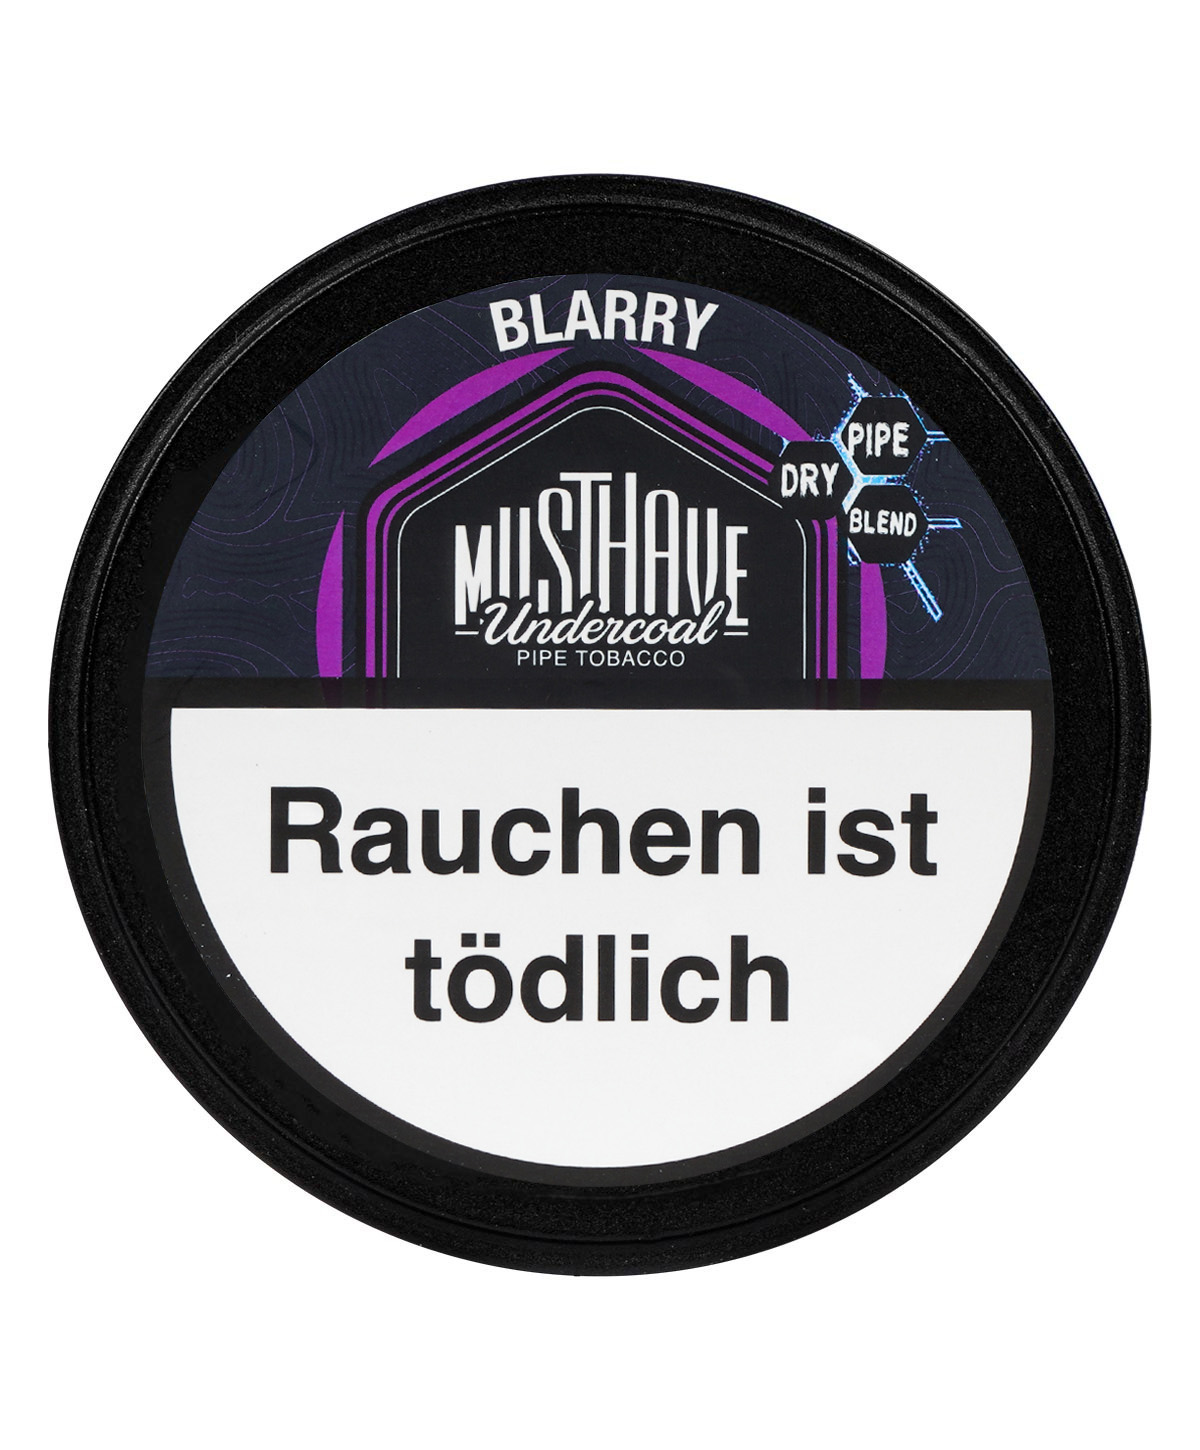 Musthave Blarry Dry Base 70g